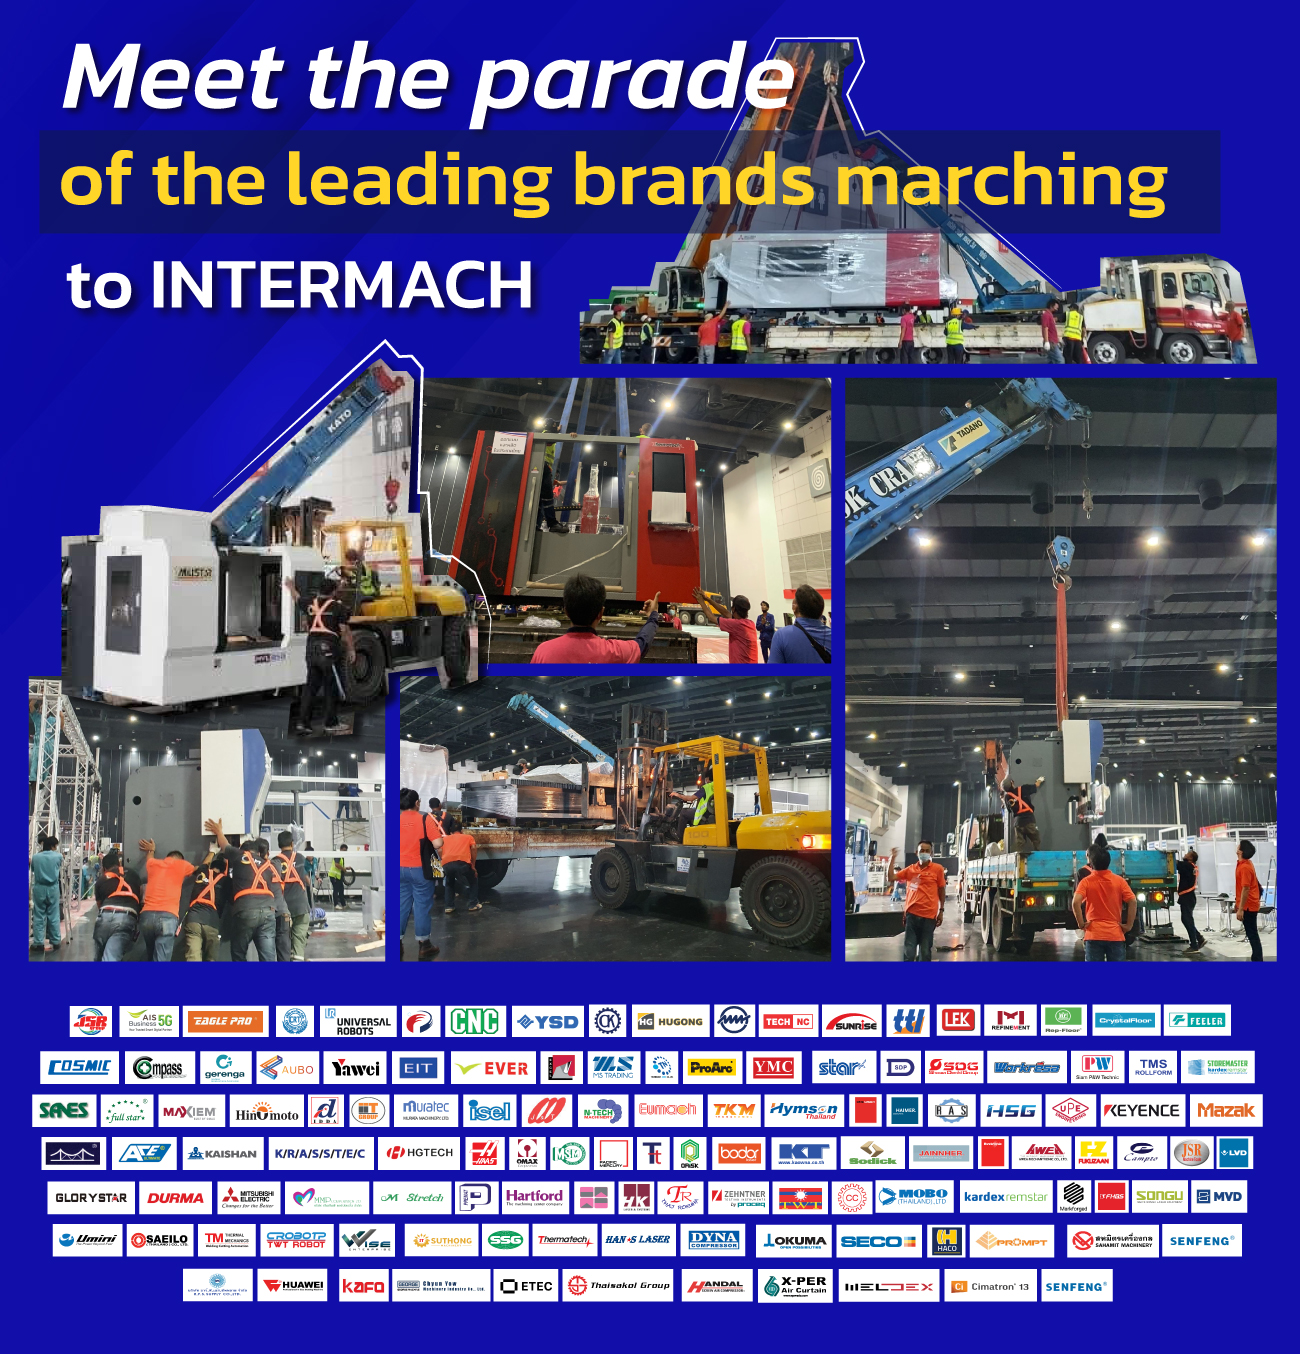 Meet the parade of the leading brands marching to INTERMACH